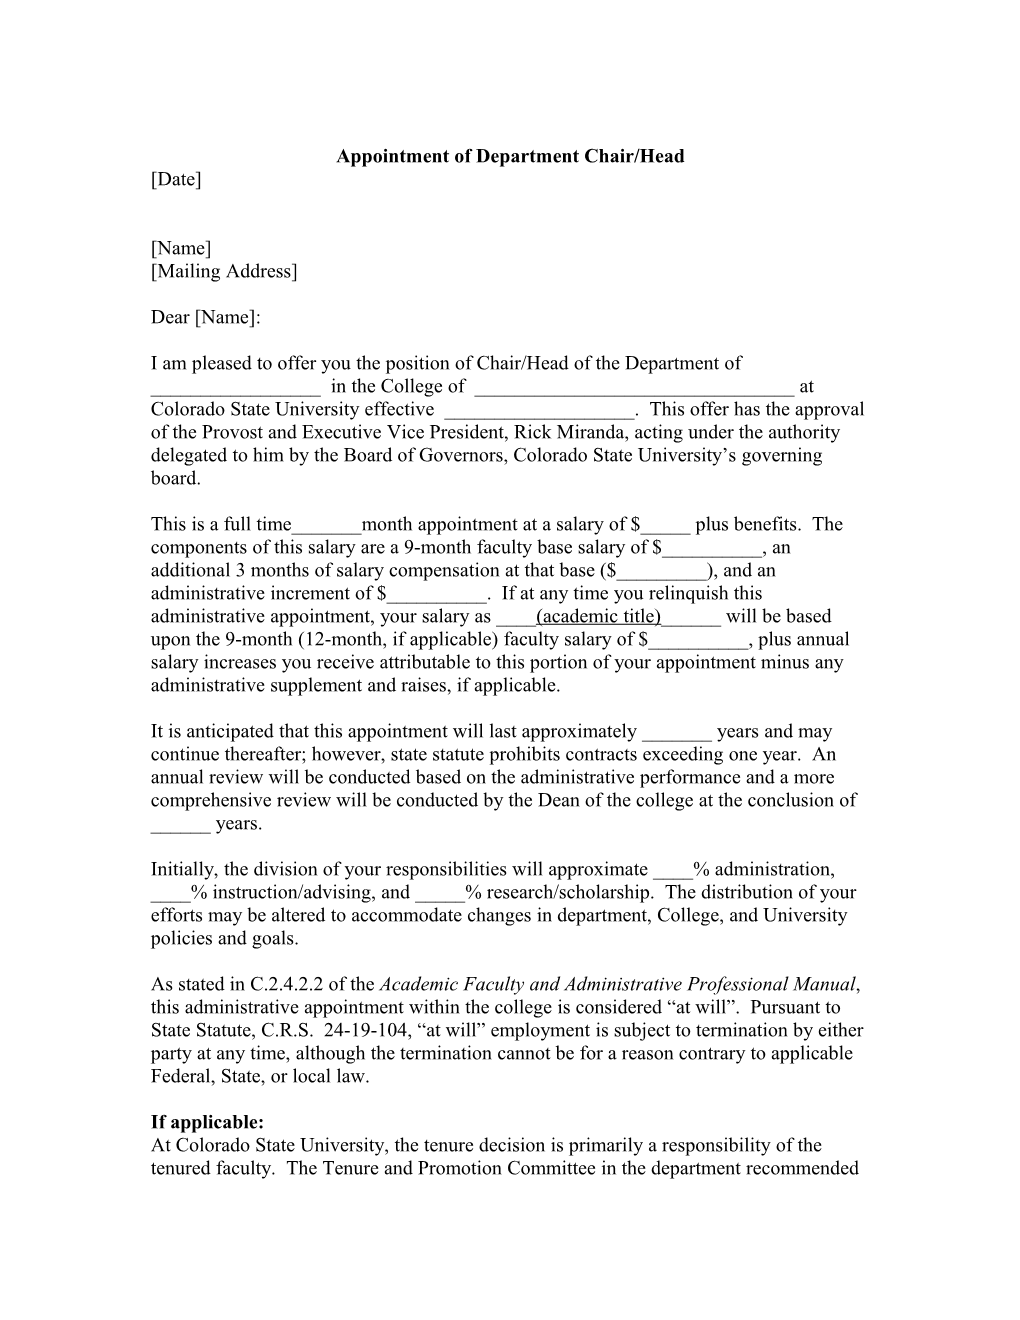 Appointment of Associate Or Assistant Dean